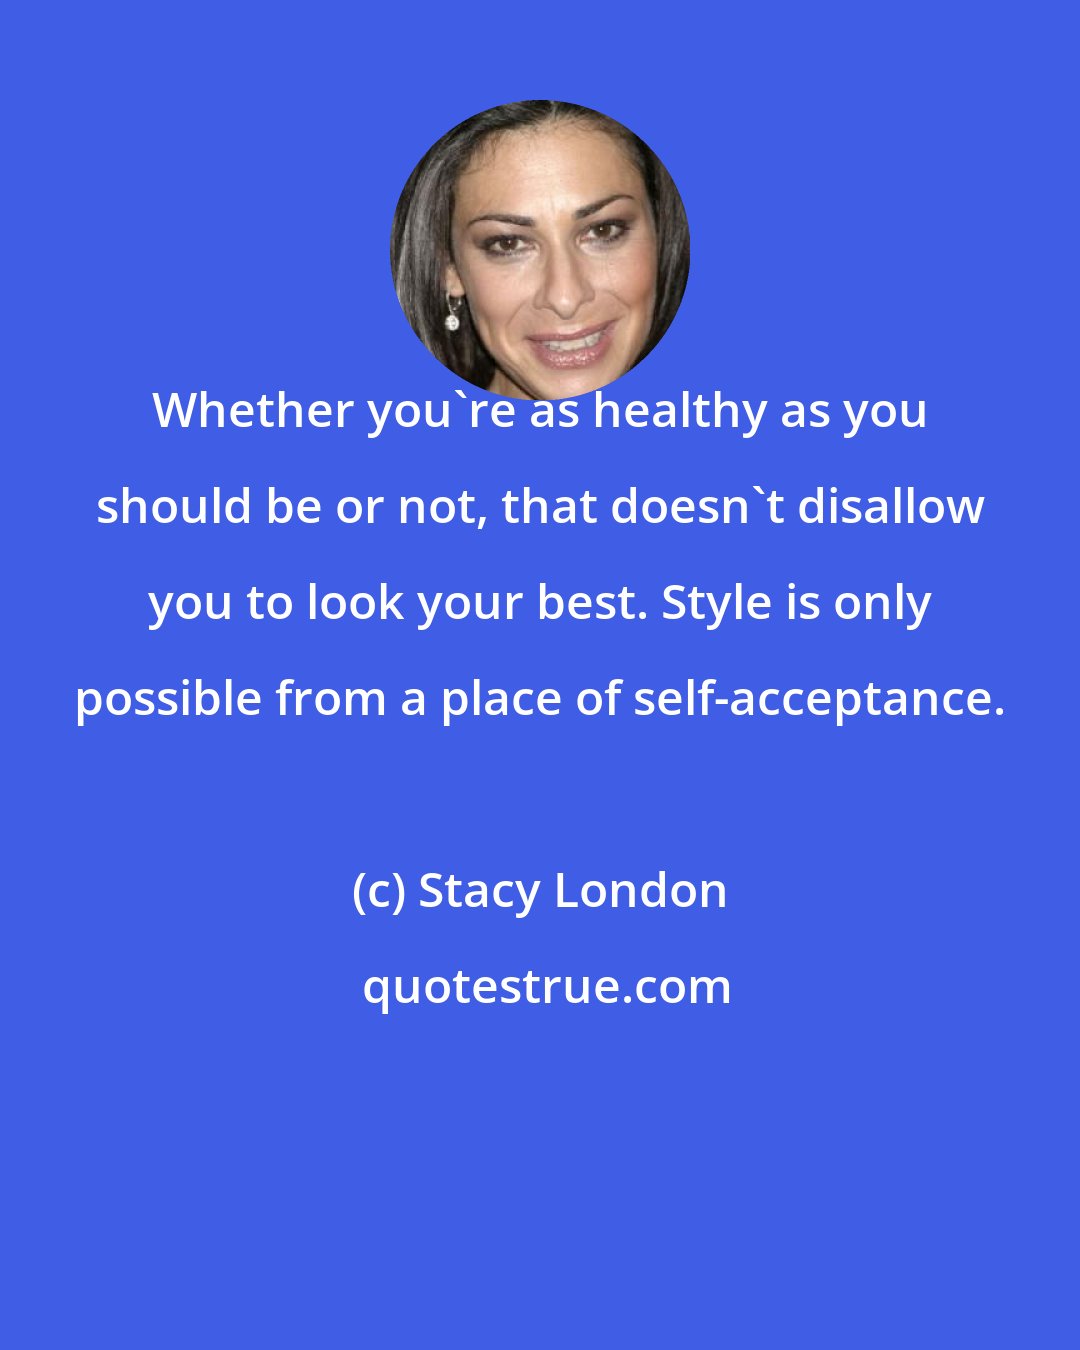 Stacy London: Whether you're as healthy as you should be or not, that doesn't disallow you to look your best. Style is only possible from a place of self-acceptance.